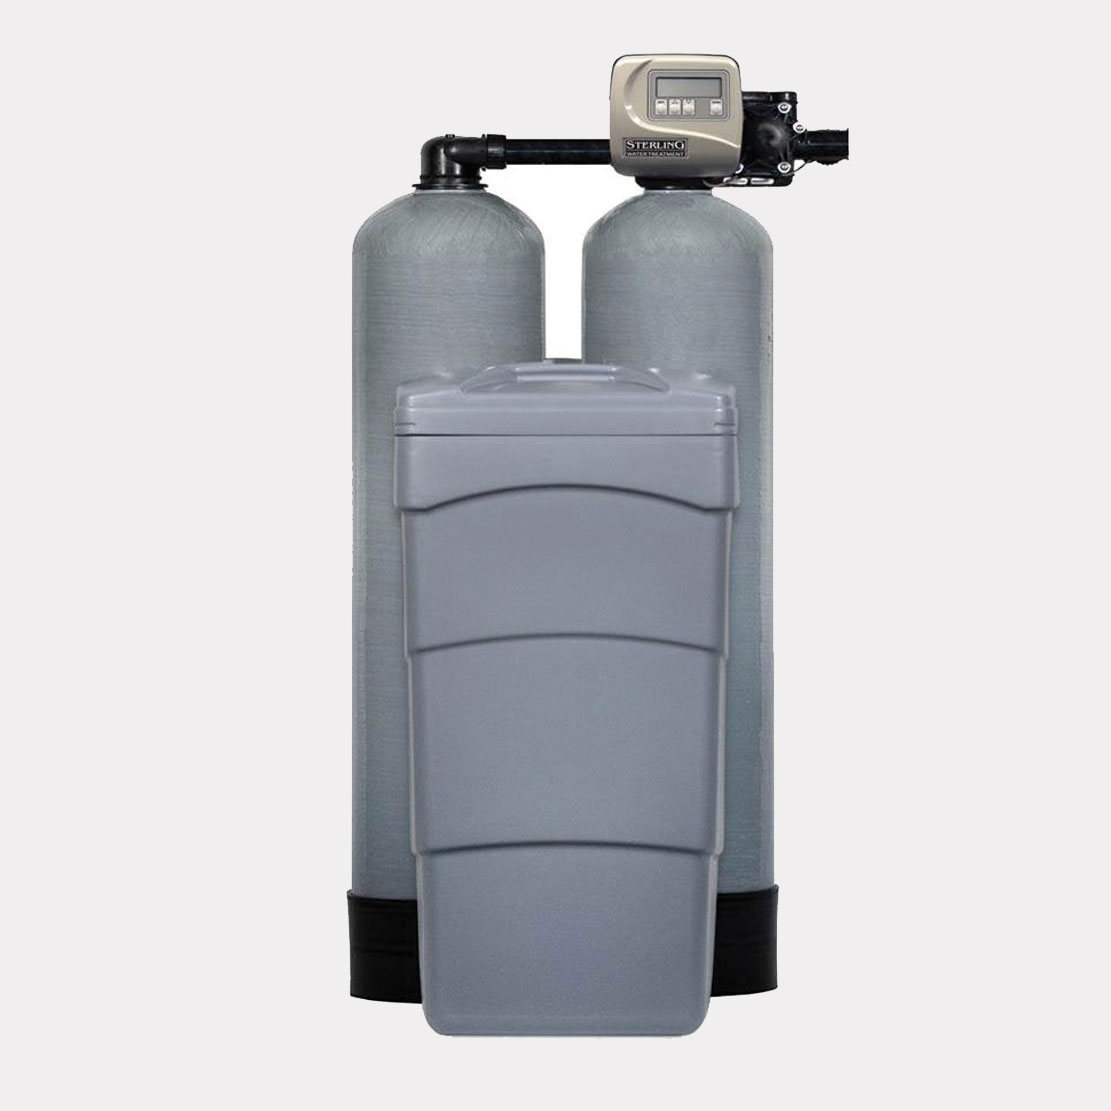 Choose us for your water softener installation